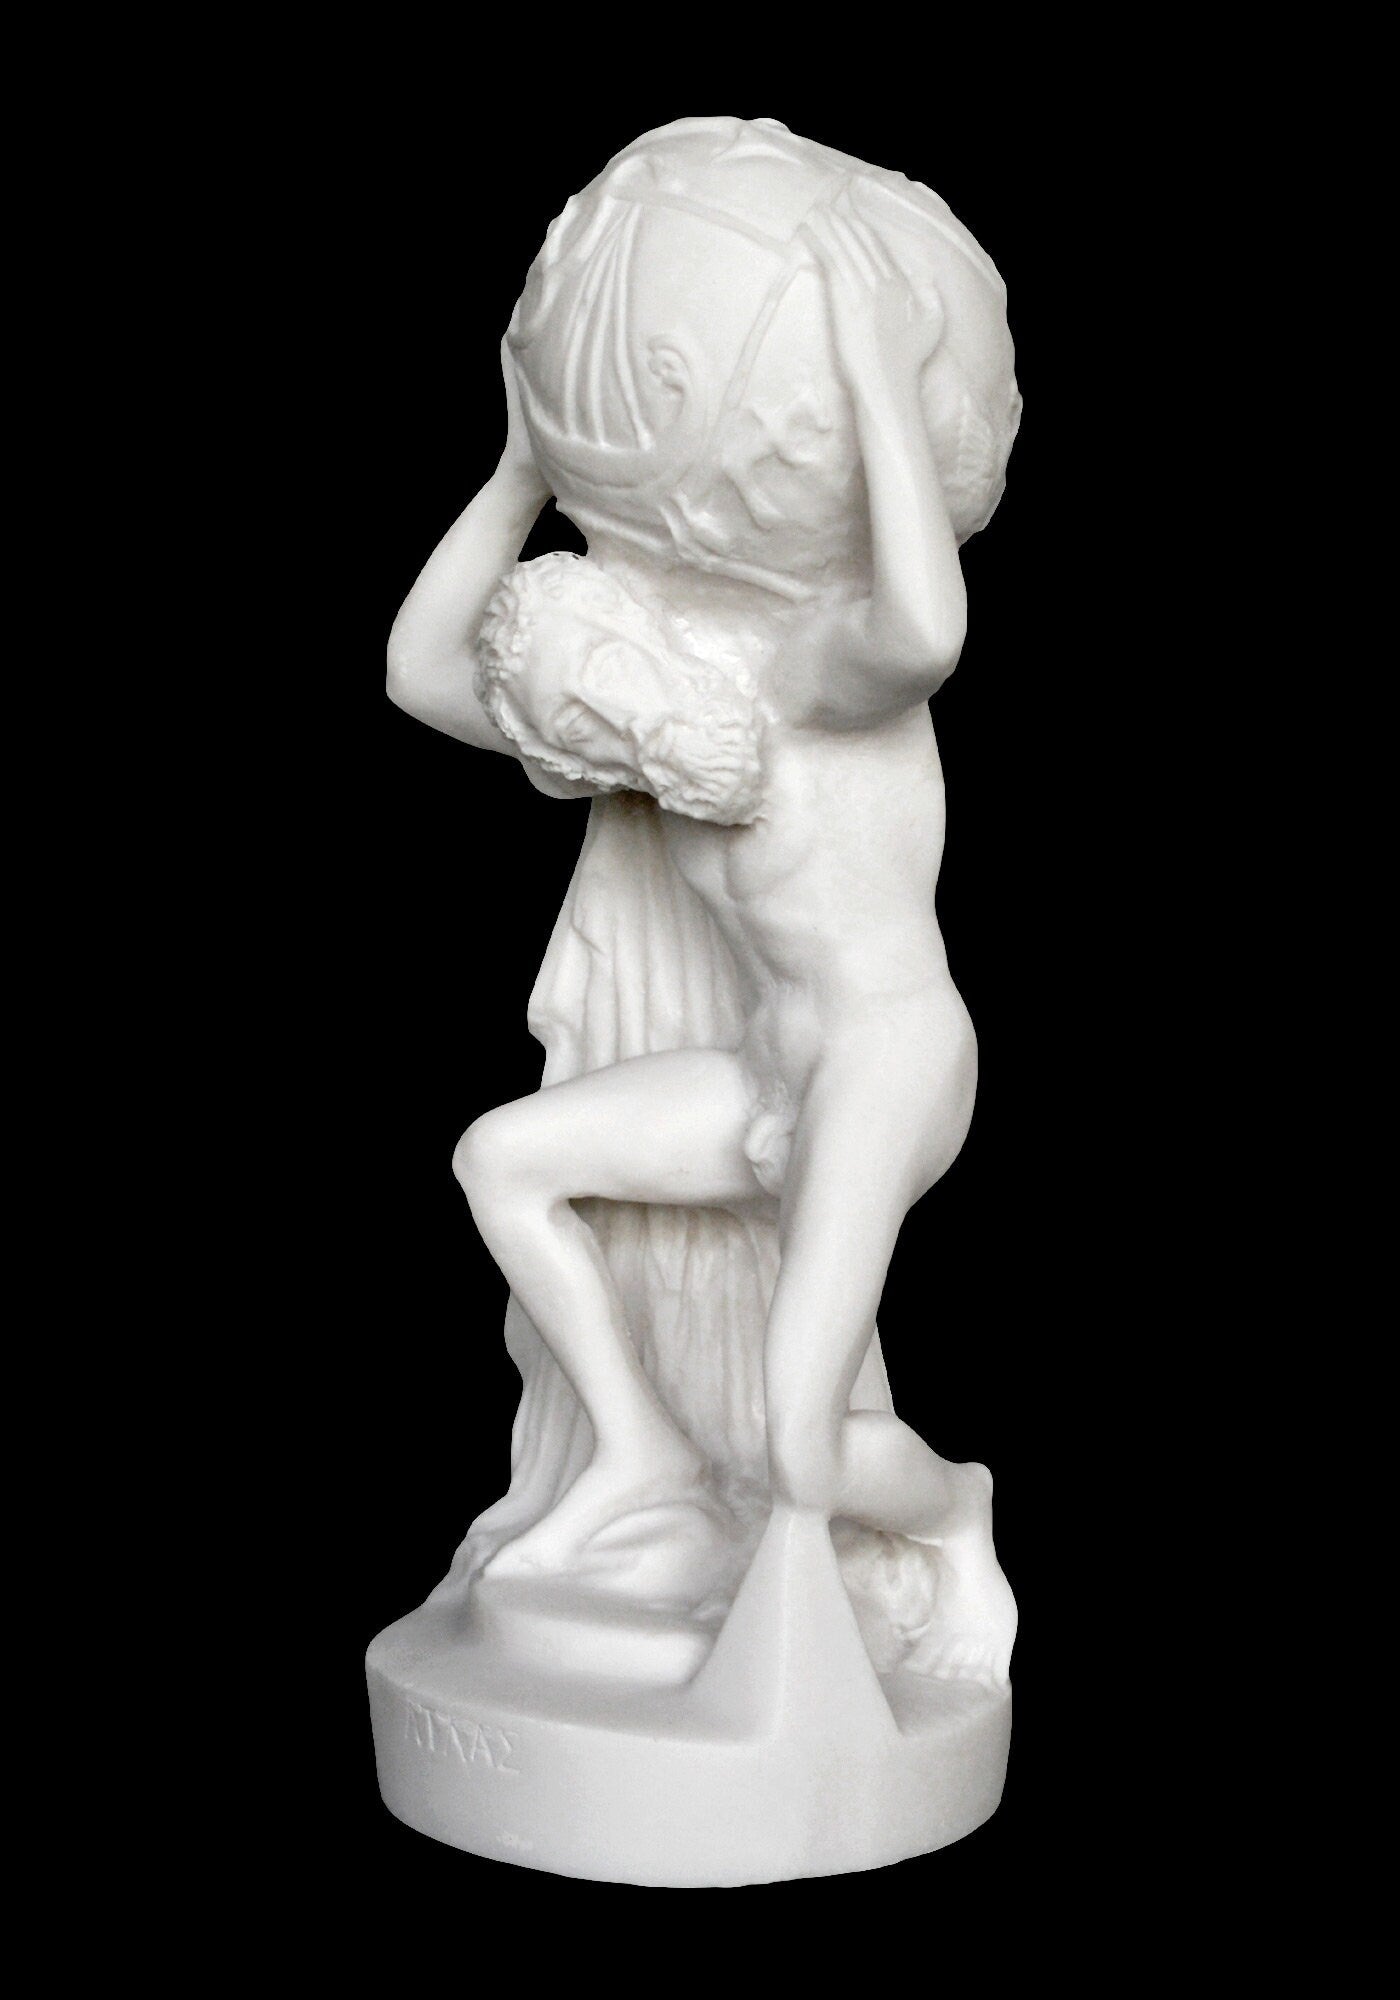 Atlas - Iapetus’ son - Leader of the Titan Rebellion against Zeus - Condemned to eternally hold up the Sky - Alabaster Statue Sculpture